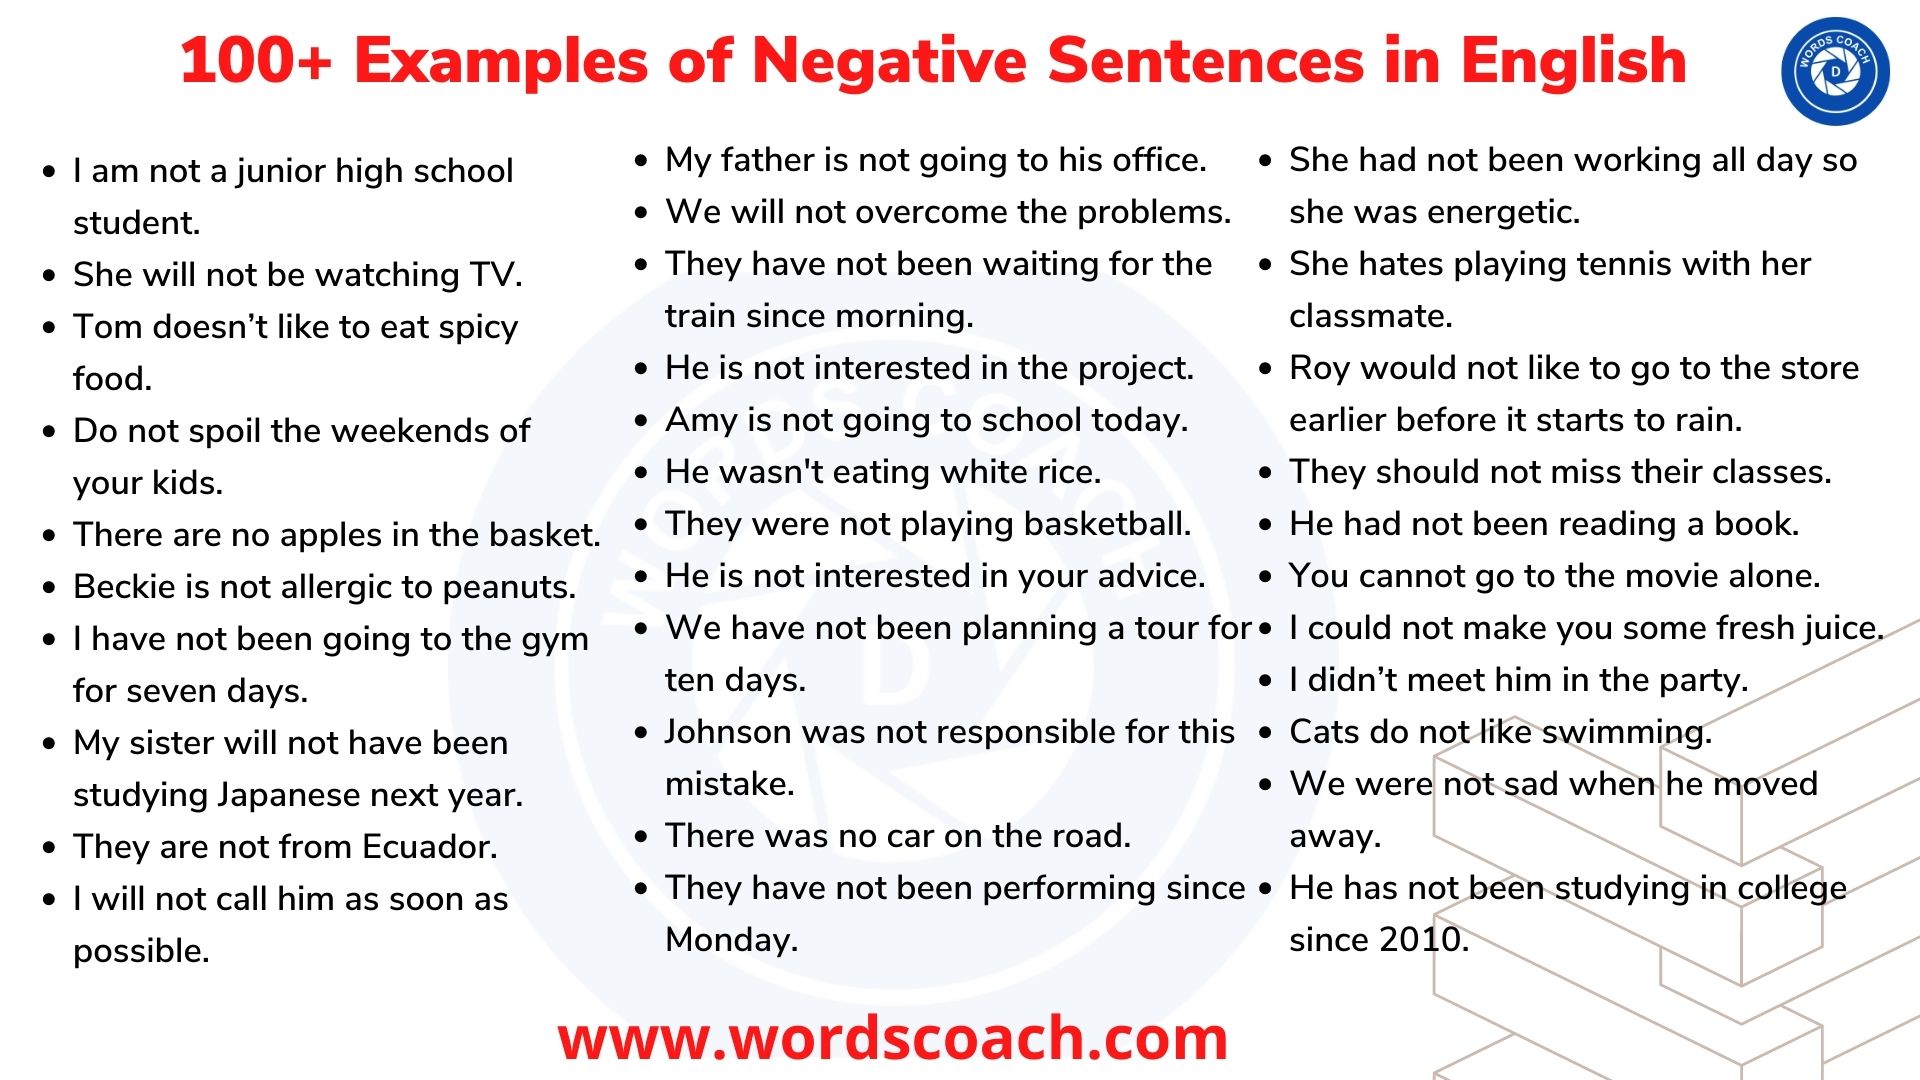 100+ Examples of Negative Sentences in English - wordscoach.com